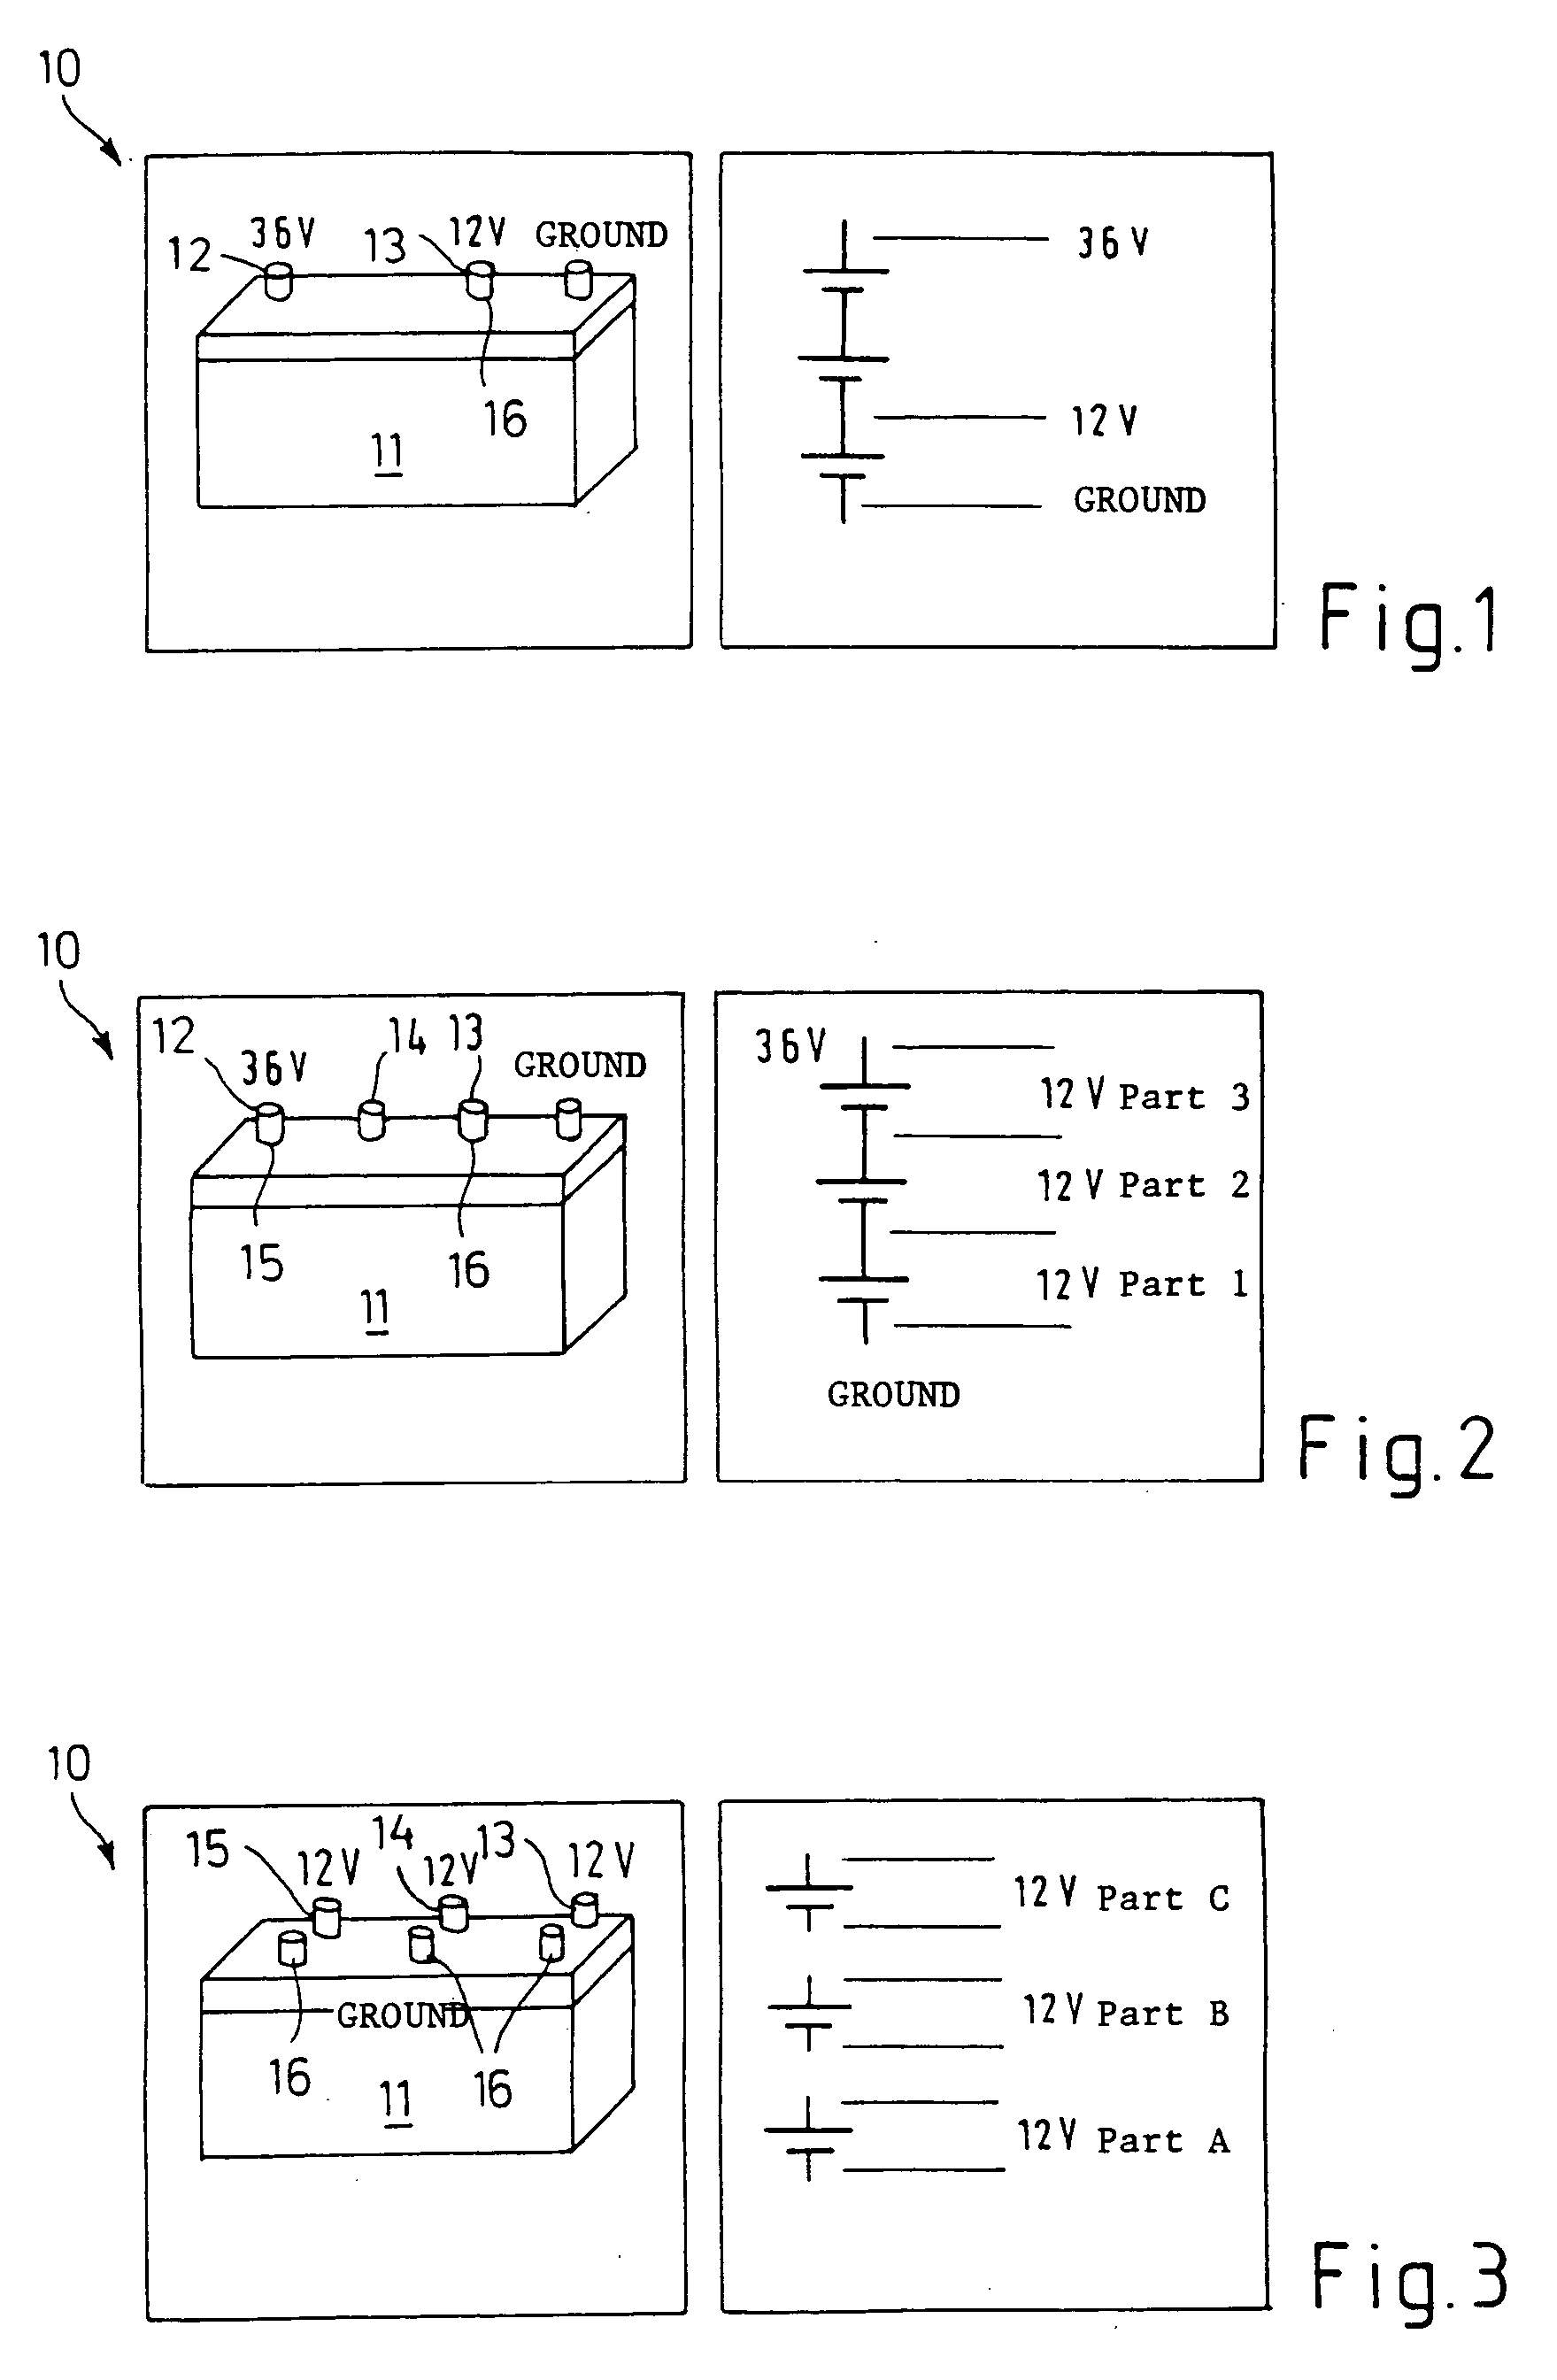 Multi-voltage level power supply system